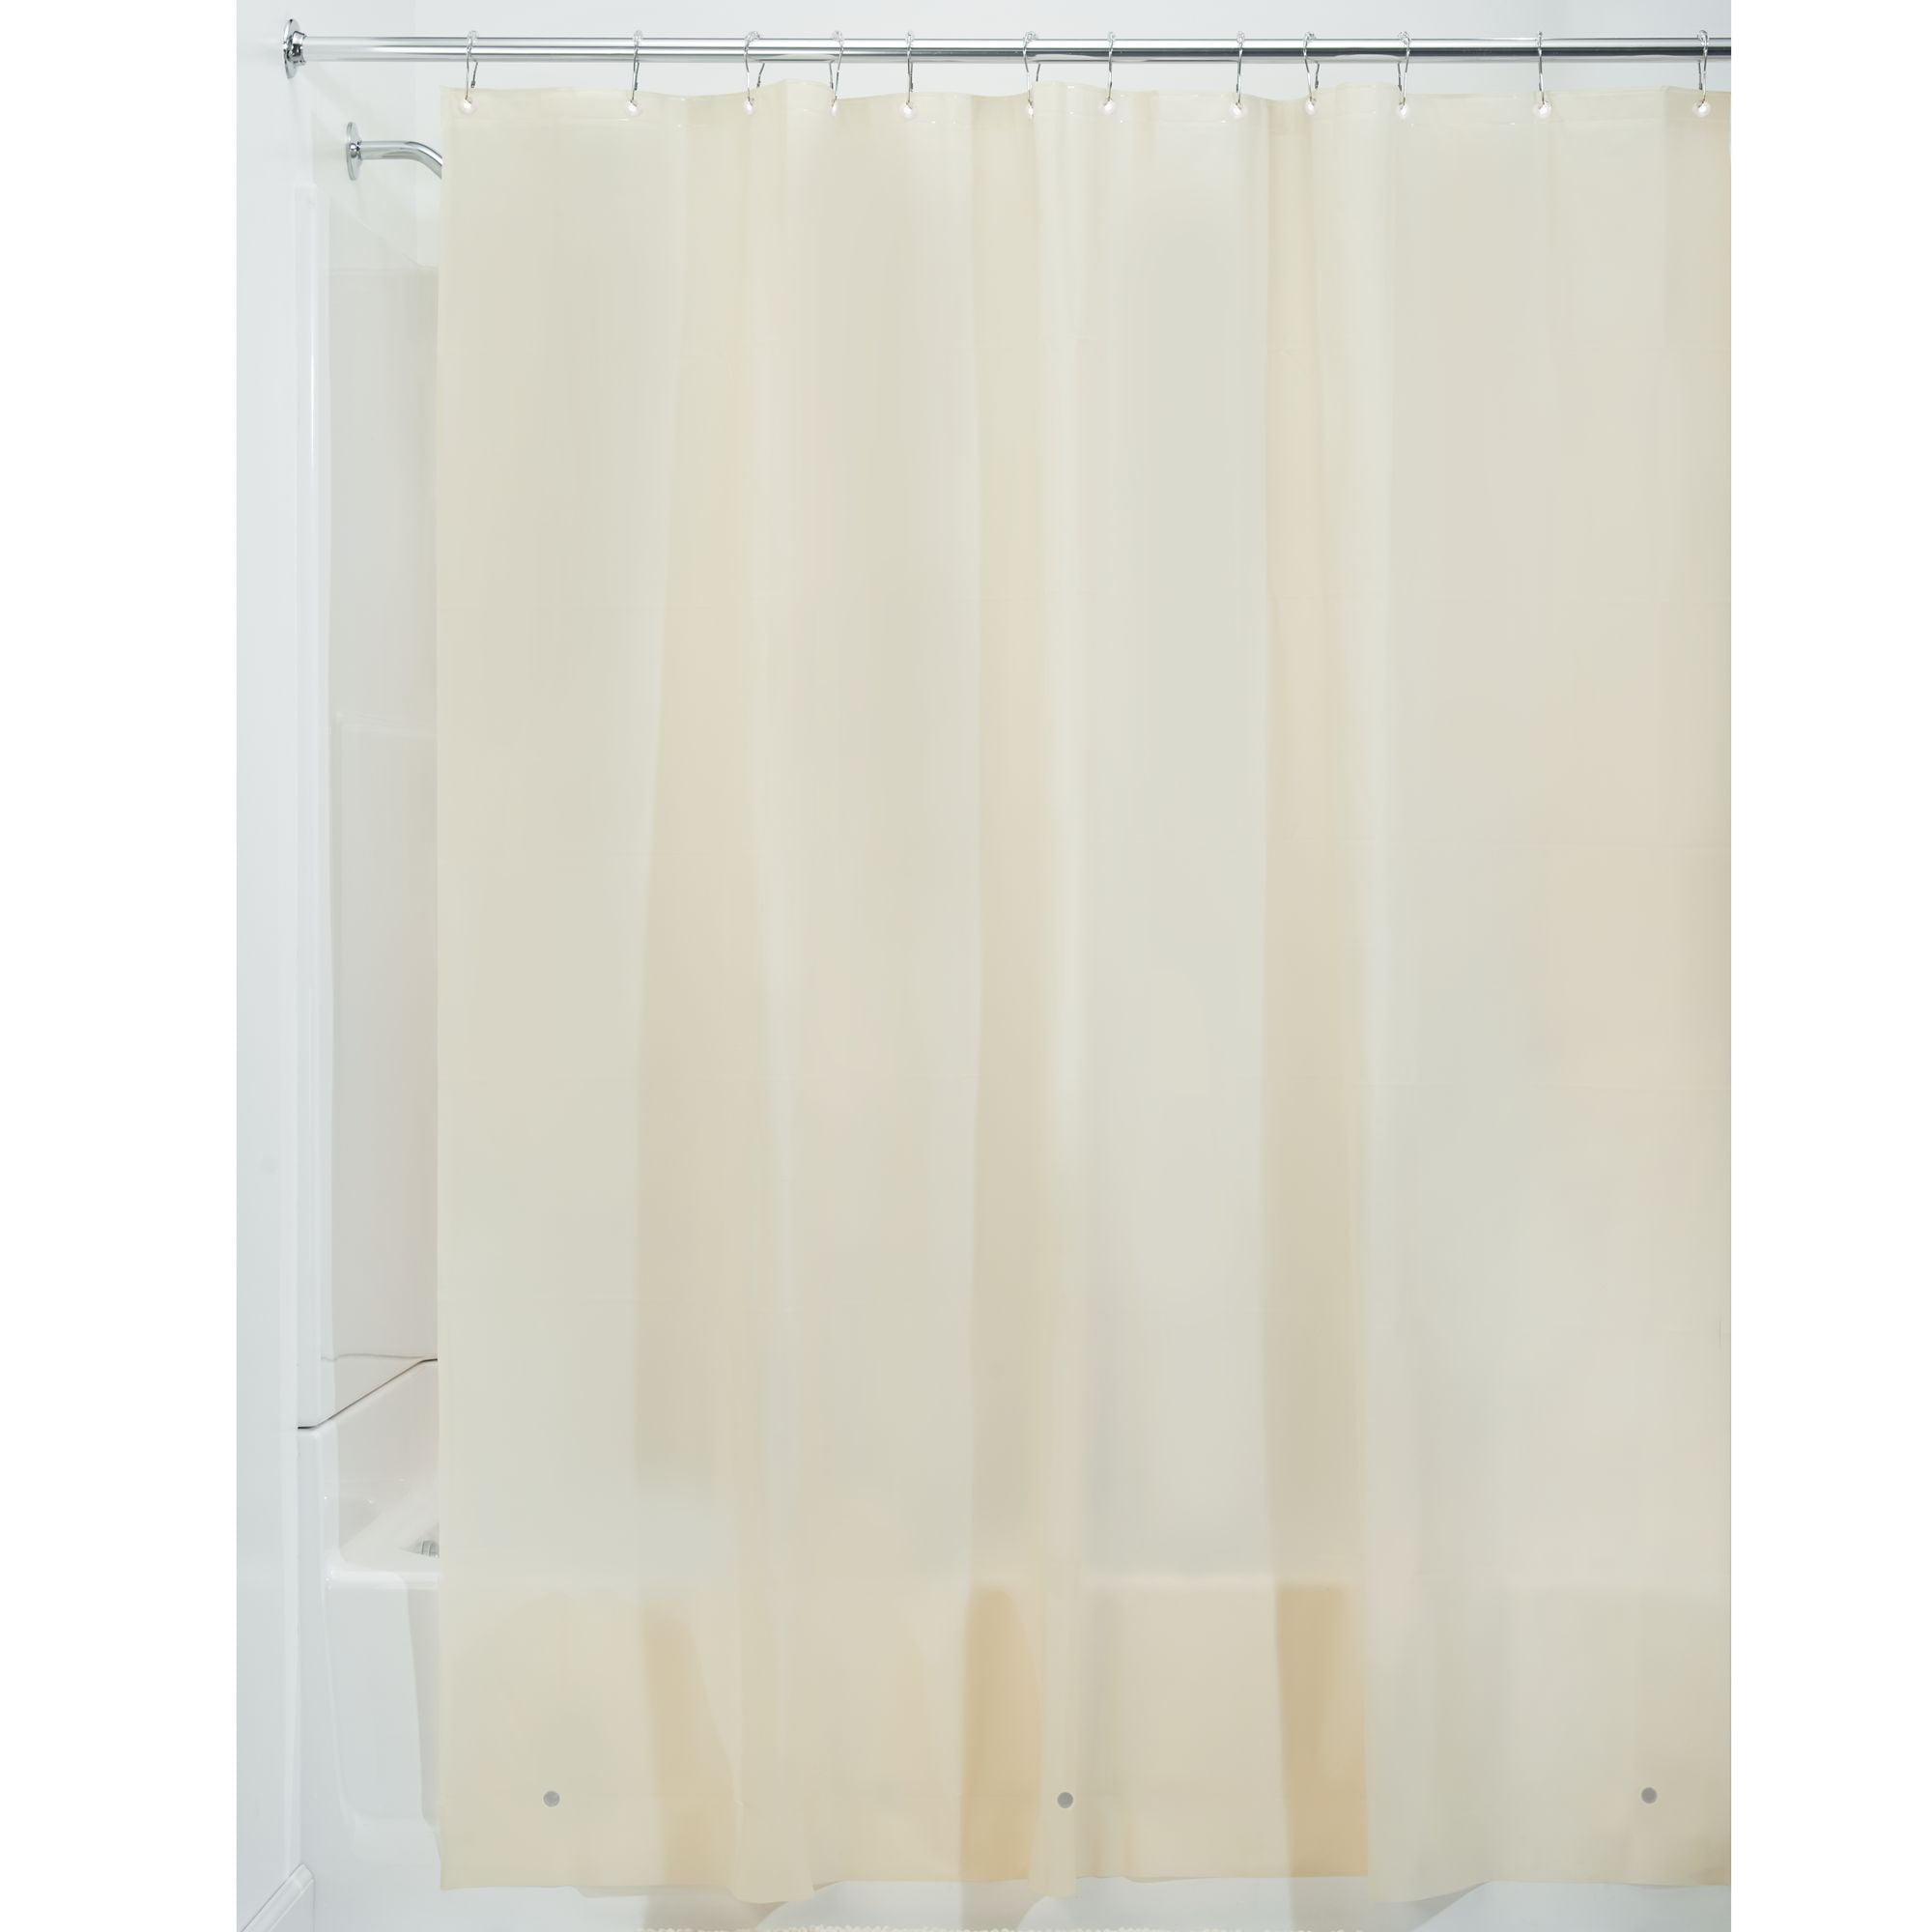 InterDesign 3.0 Liner Curtain for Shower Made of Mould-Free PEVA Navy Blue 183.0 x 183.0 cm 